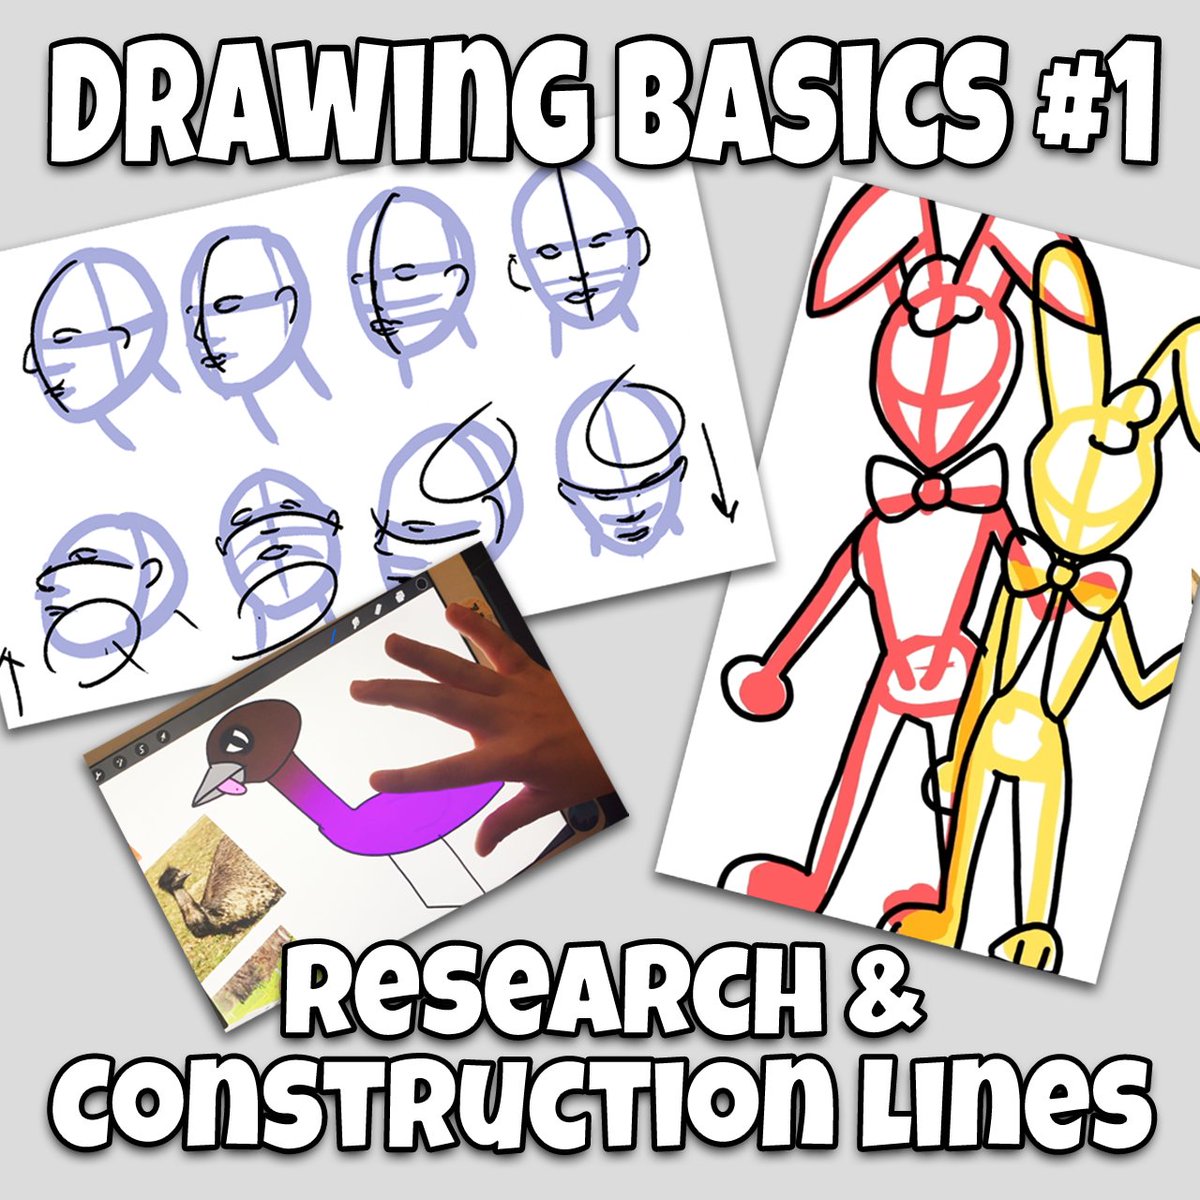 This week, the family looks at how to use #ImageResearch & #ConstructionLines to make drawing easier with #Pencils, #Procreate, & #Photoshop.  For #artists of all ages wanting to #draw, but don't know where to start.

youtu.be/rOa4ORNTdJE

#EmoEmu #Vanny #Glitchtrap #sketching